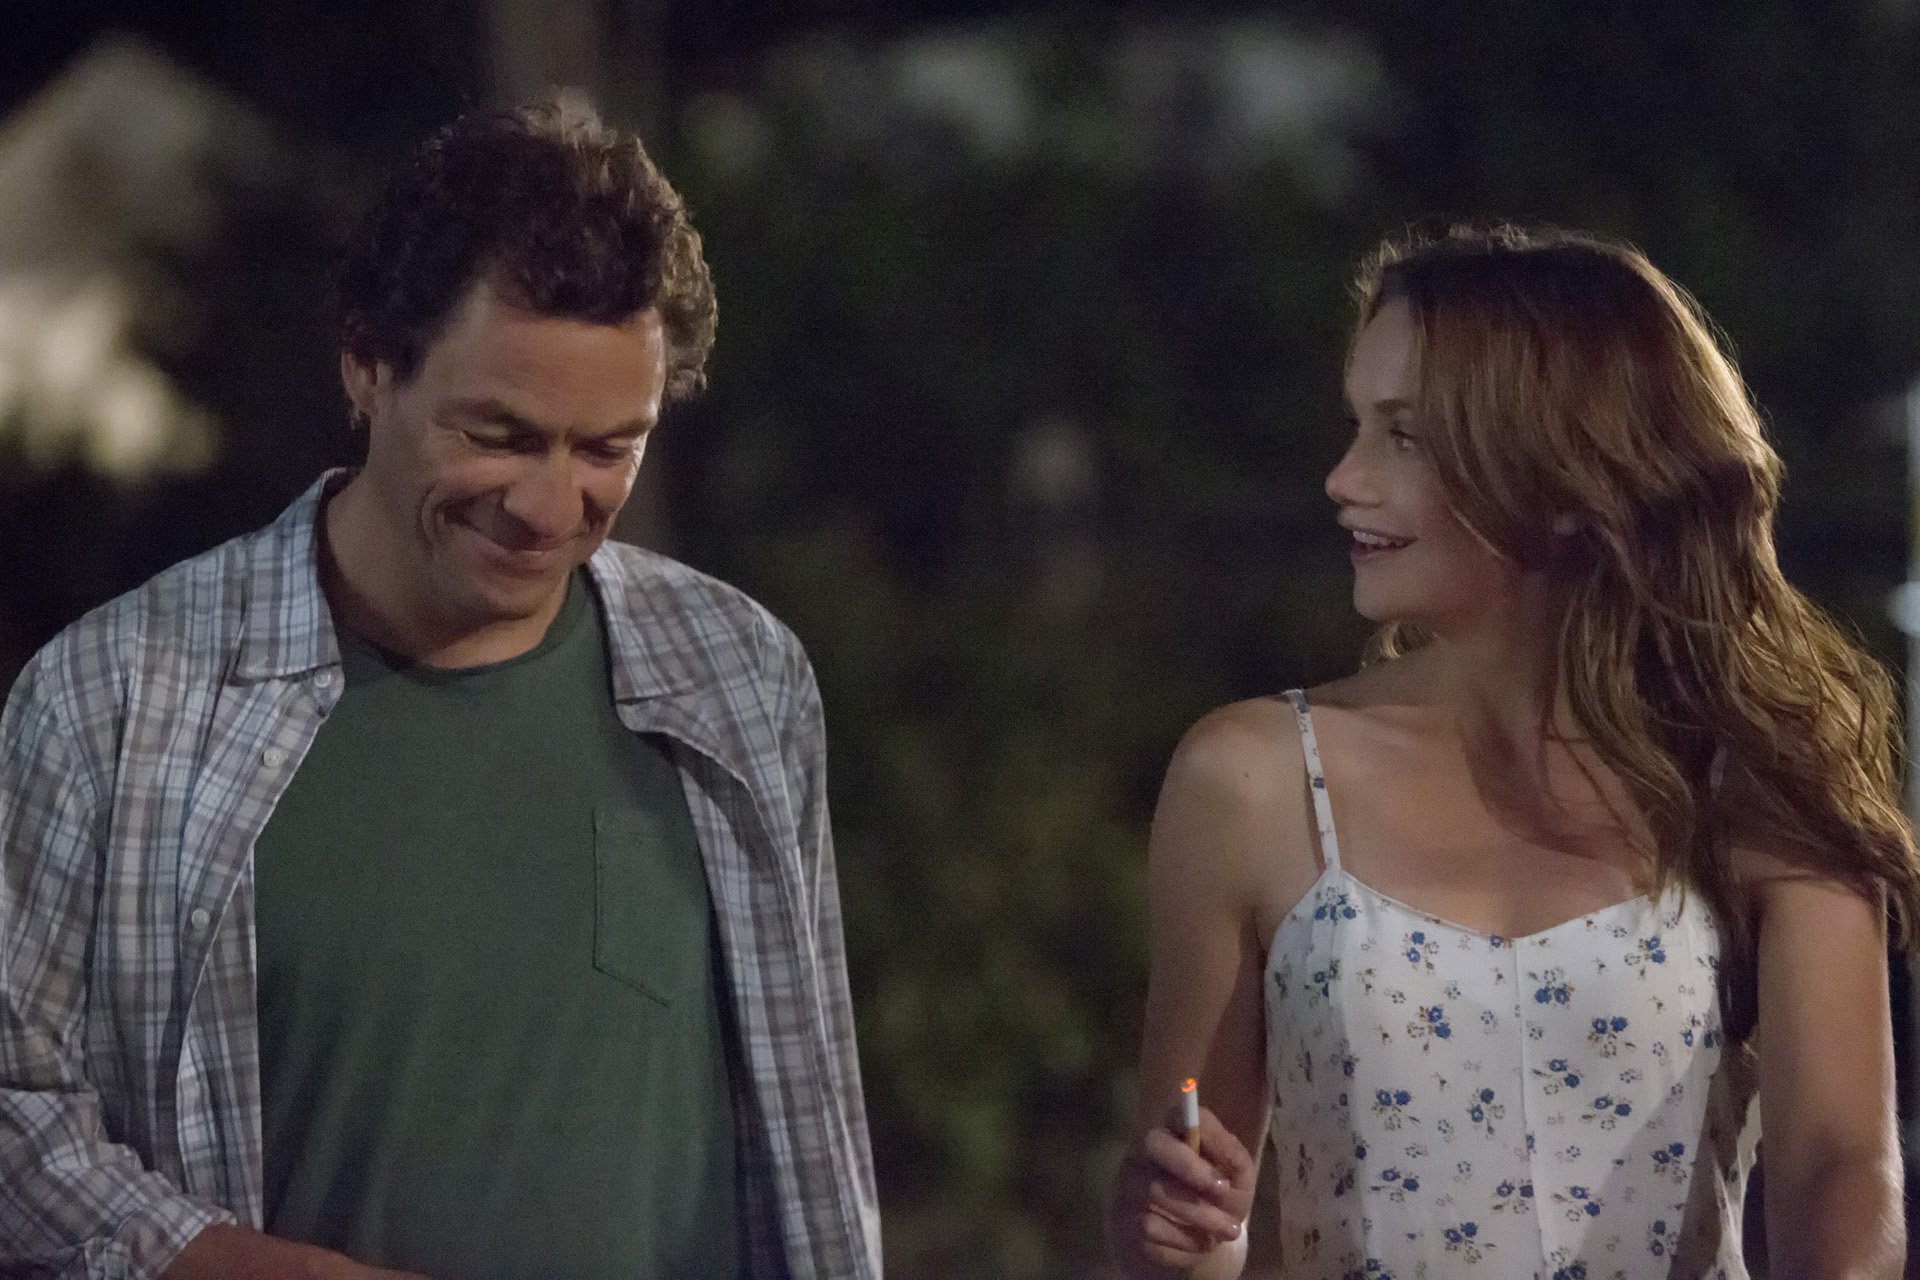 Dominic West as Noah Solloway and Ruth Wilson as Alison Bailey in The Affair